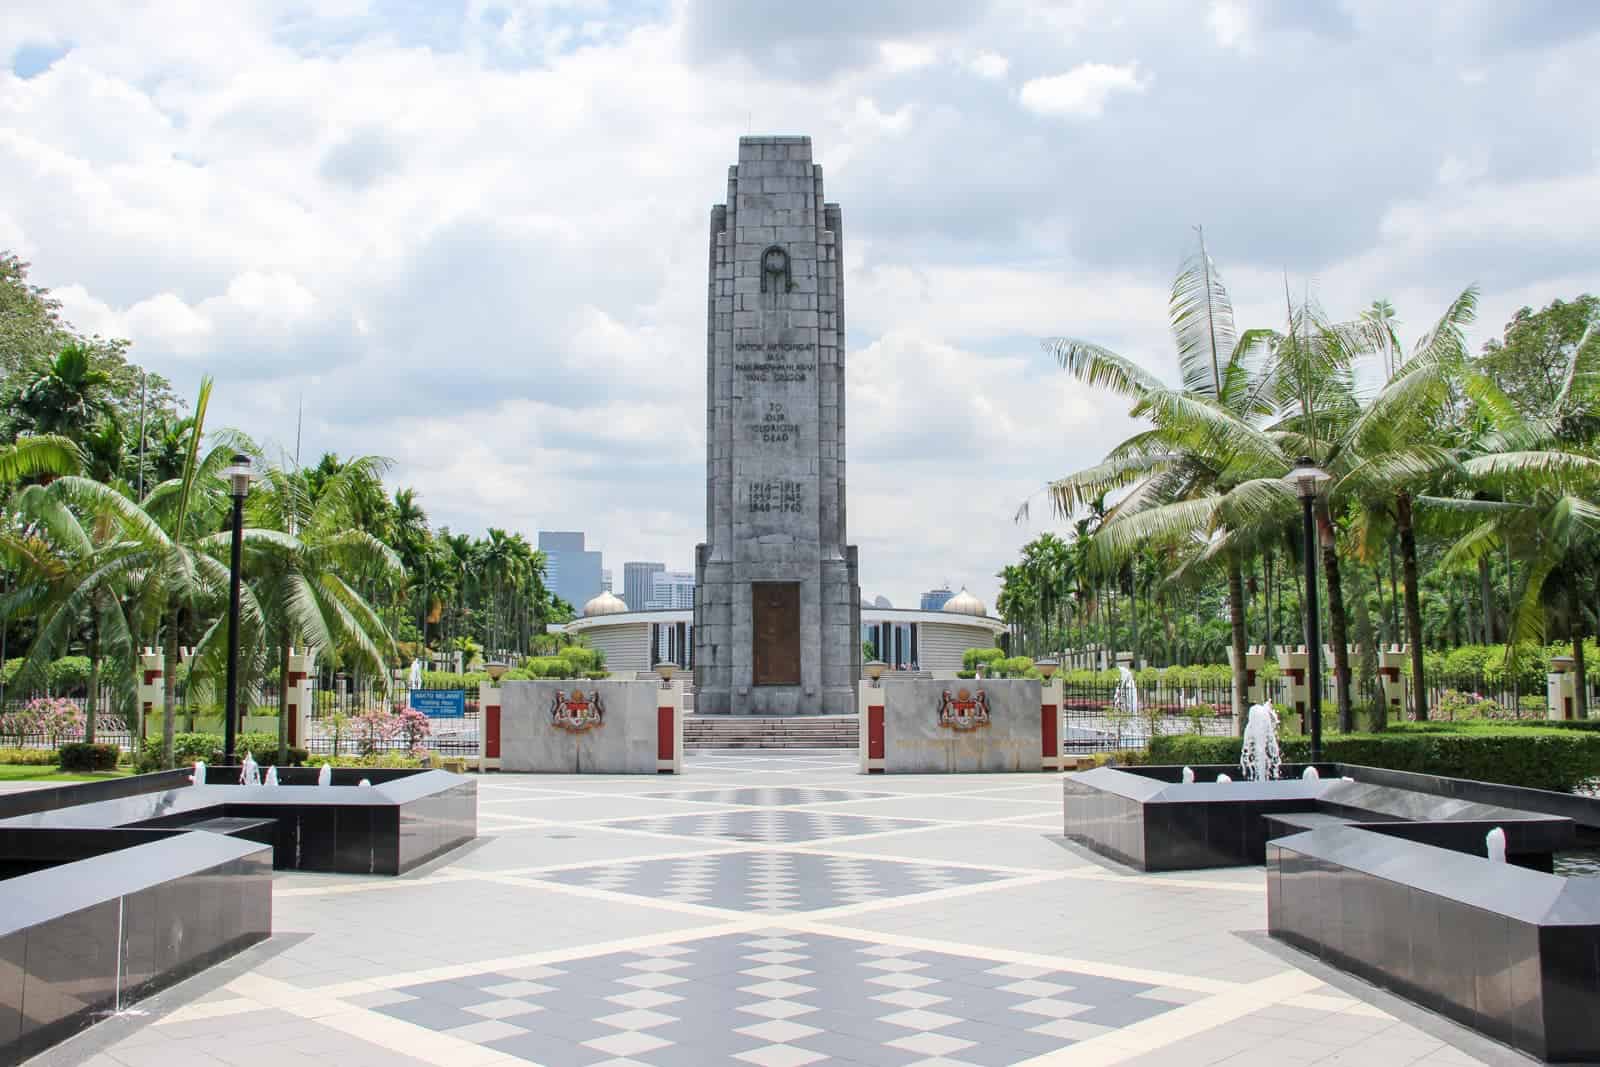 Visiting the National Monument in Kuala Lumpur, Malaysia